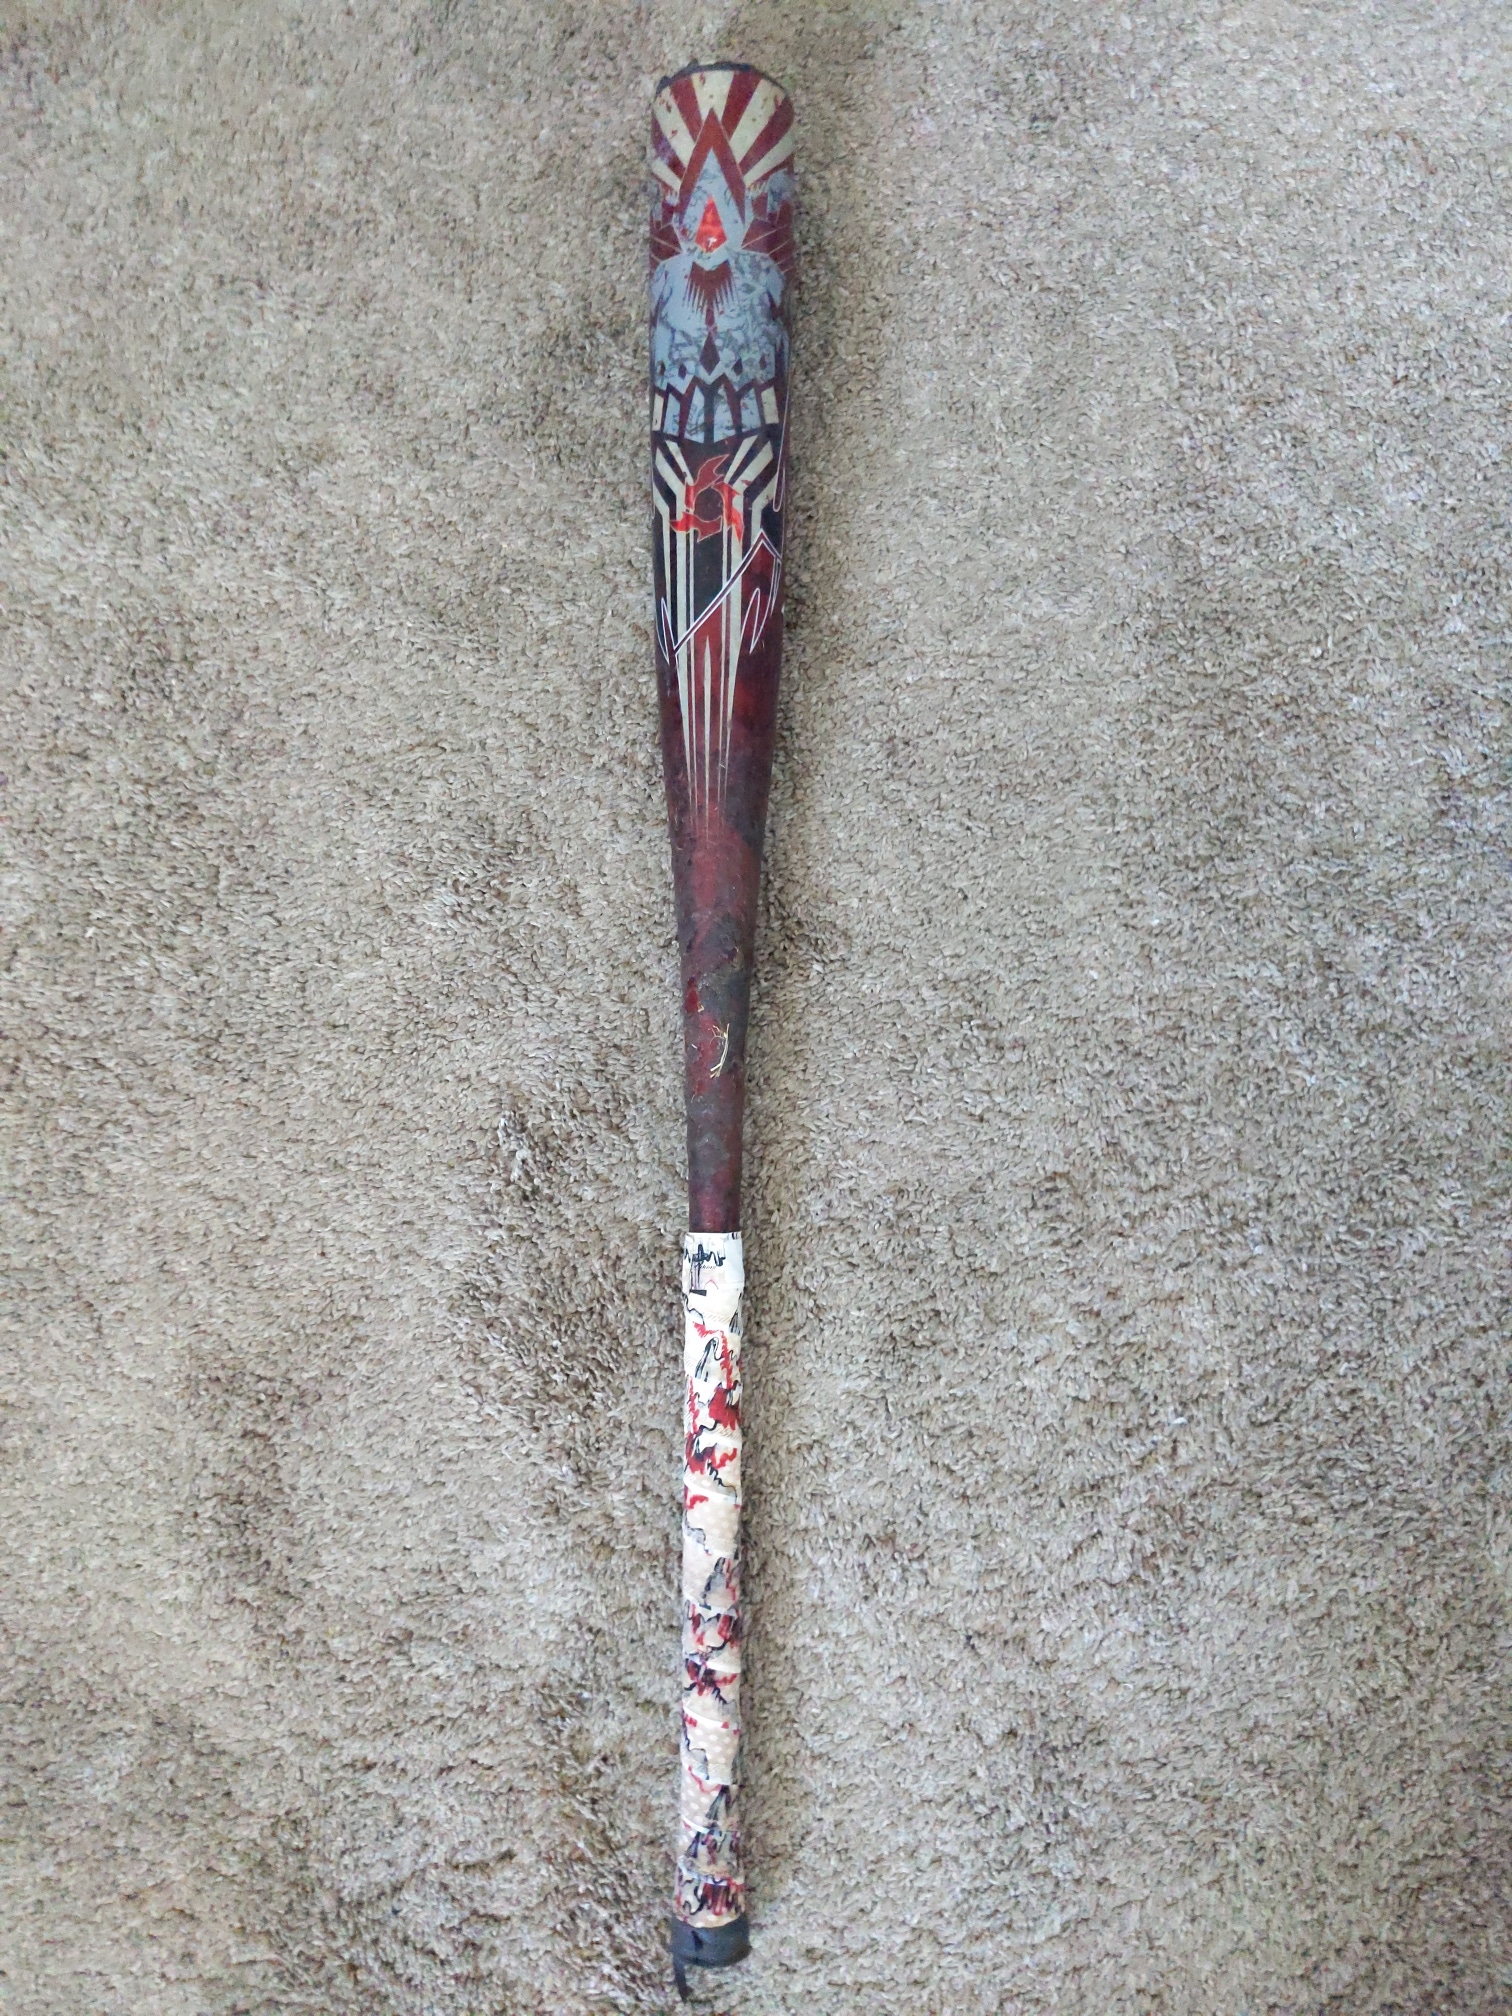 KNOBLESS Used BBCOR Certified 2022 DeMarini Alloy Voodoo One Bat (-3) 30 oz 33"